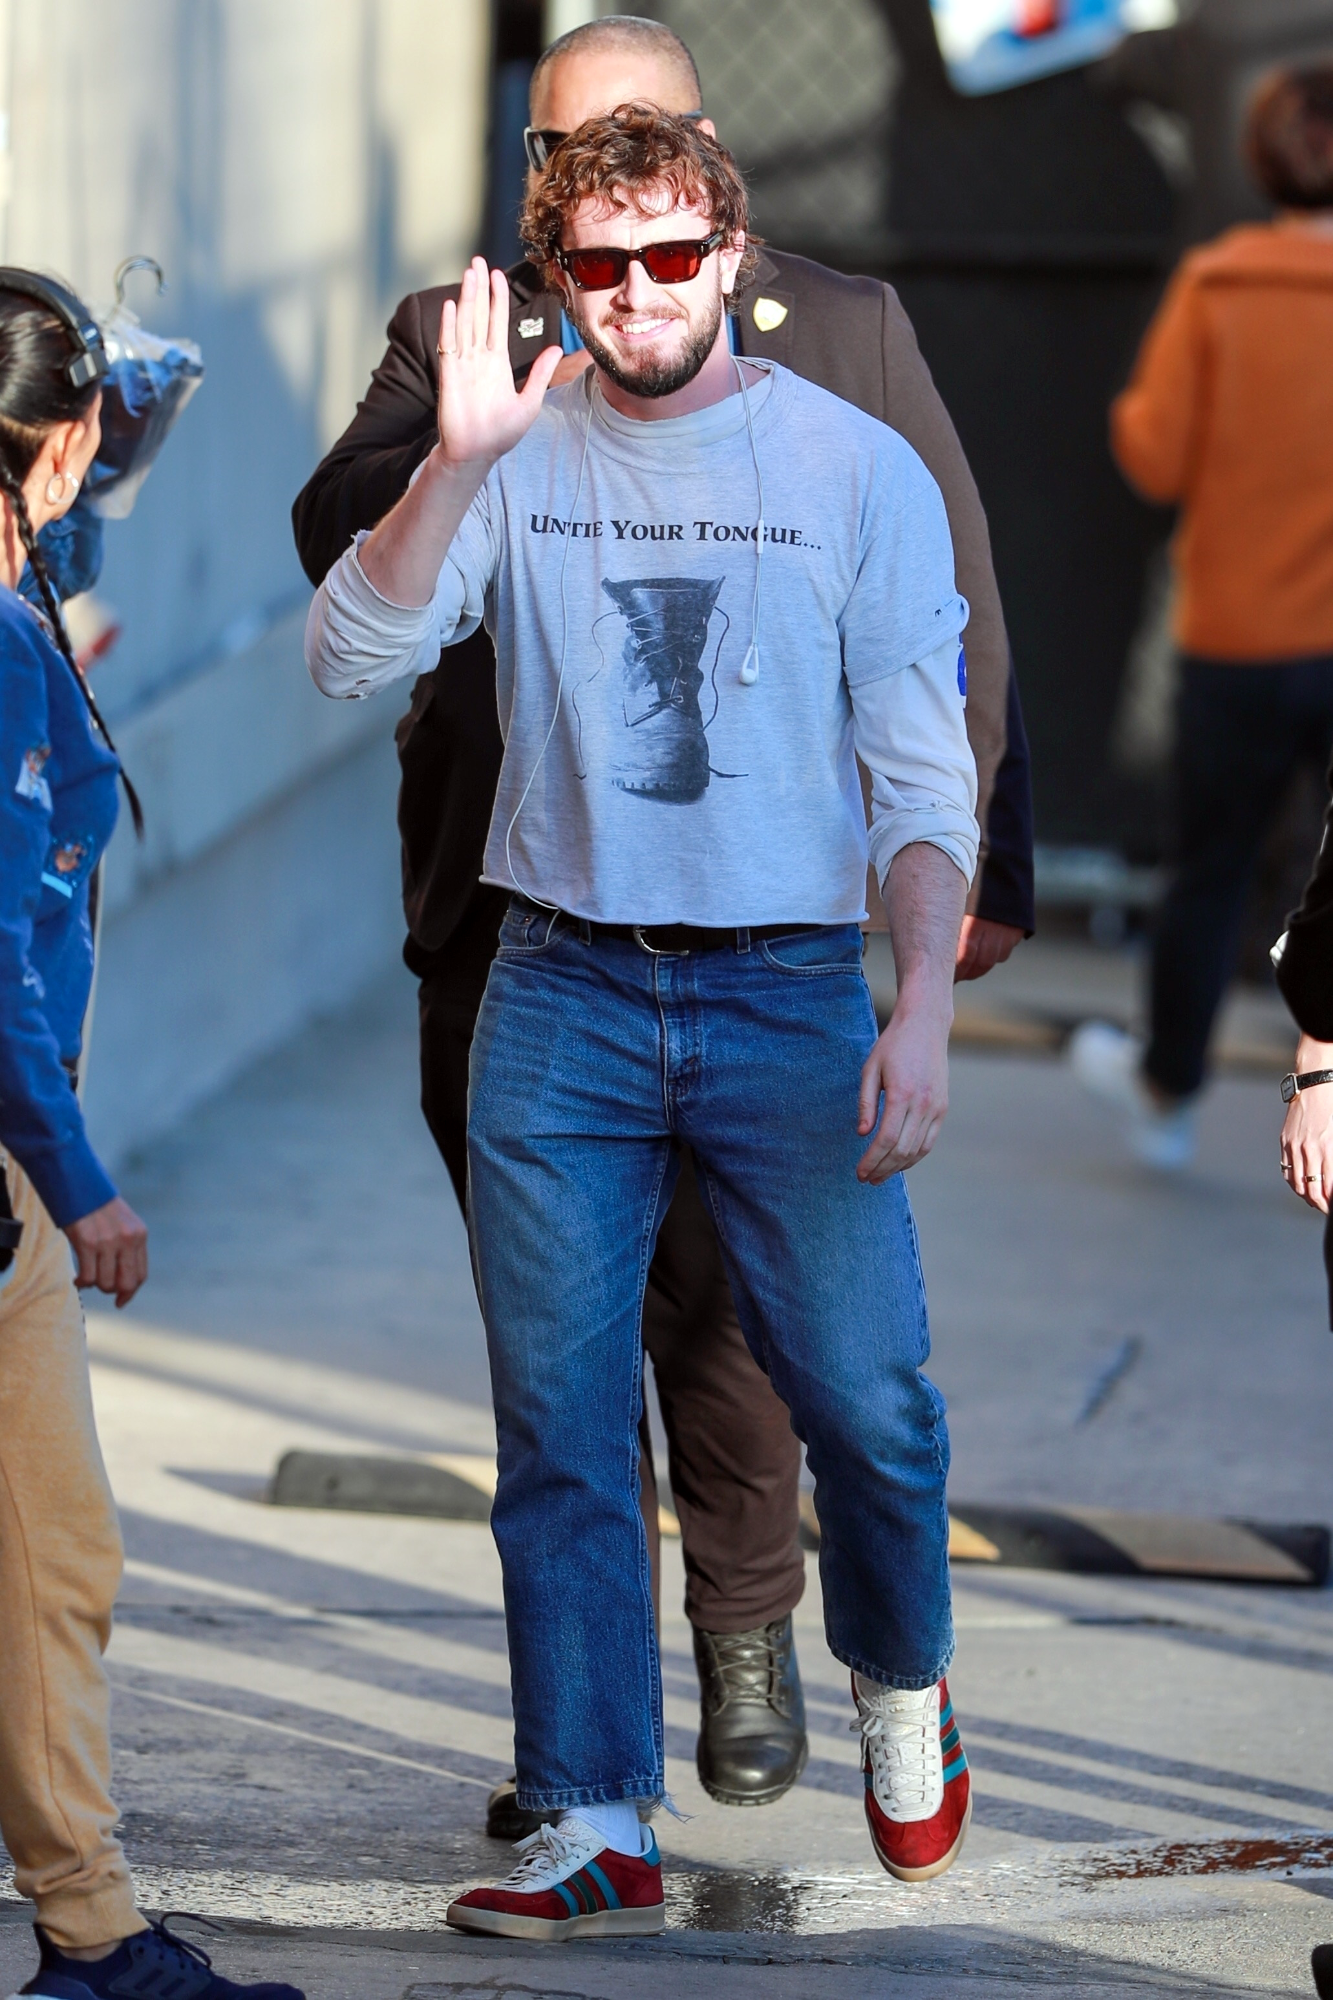 Paul Mescal wears a crop stop sweater with jeans & adidas sneakers to Jimmy Kimmel